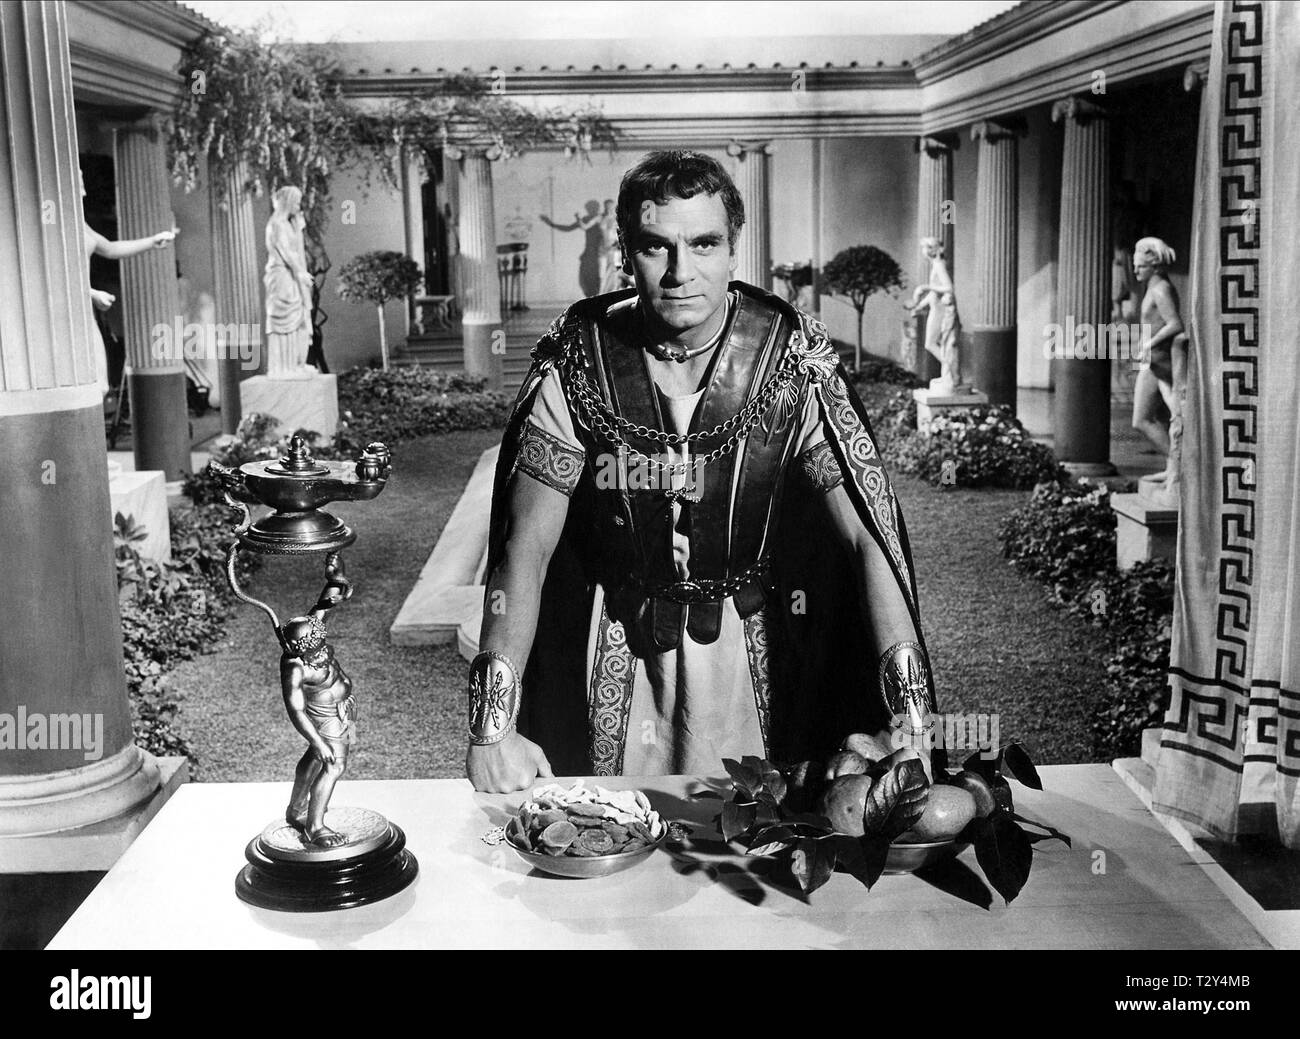 LAURENCE OLIVIER, SPARTACUS, 1960 Stock Photo